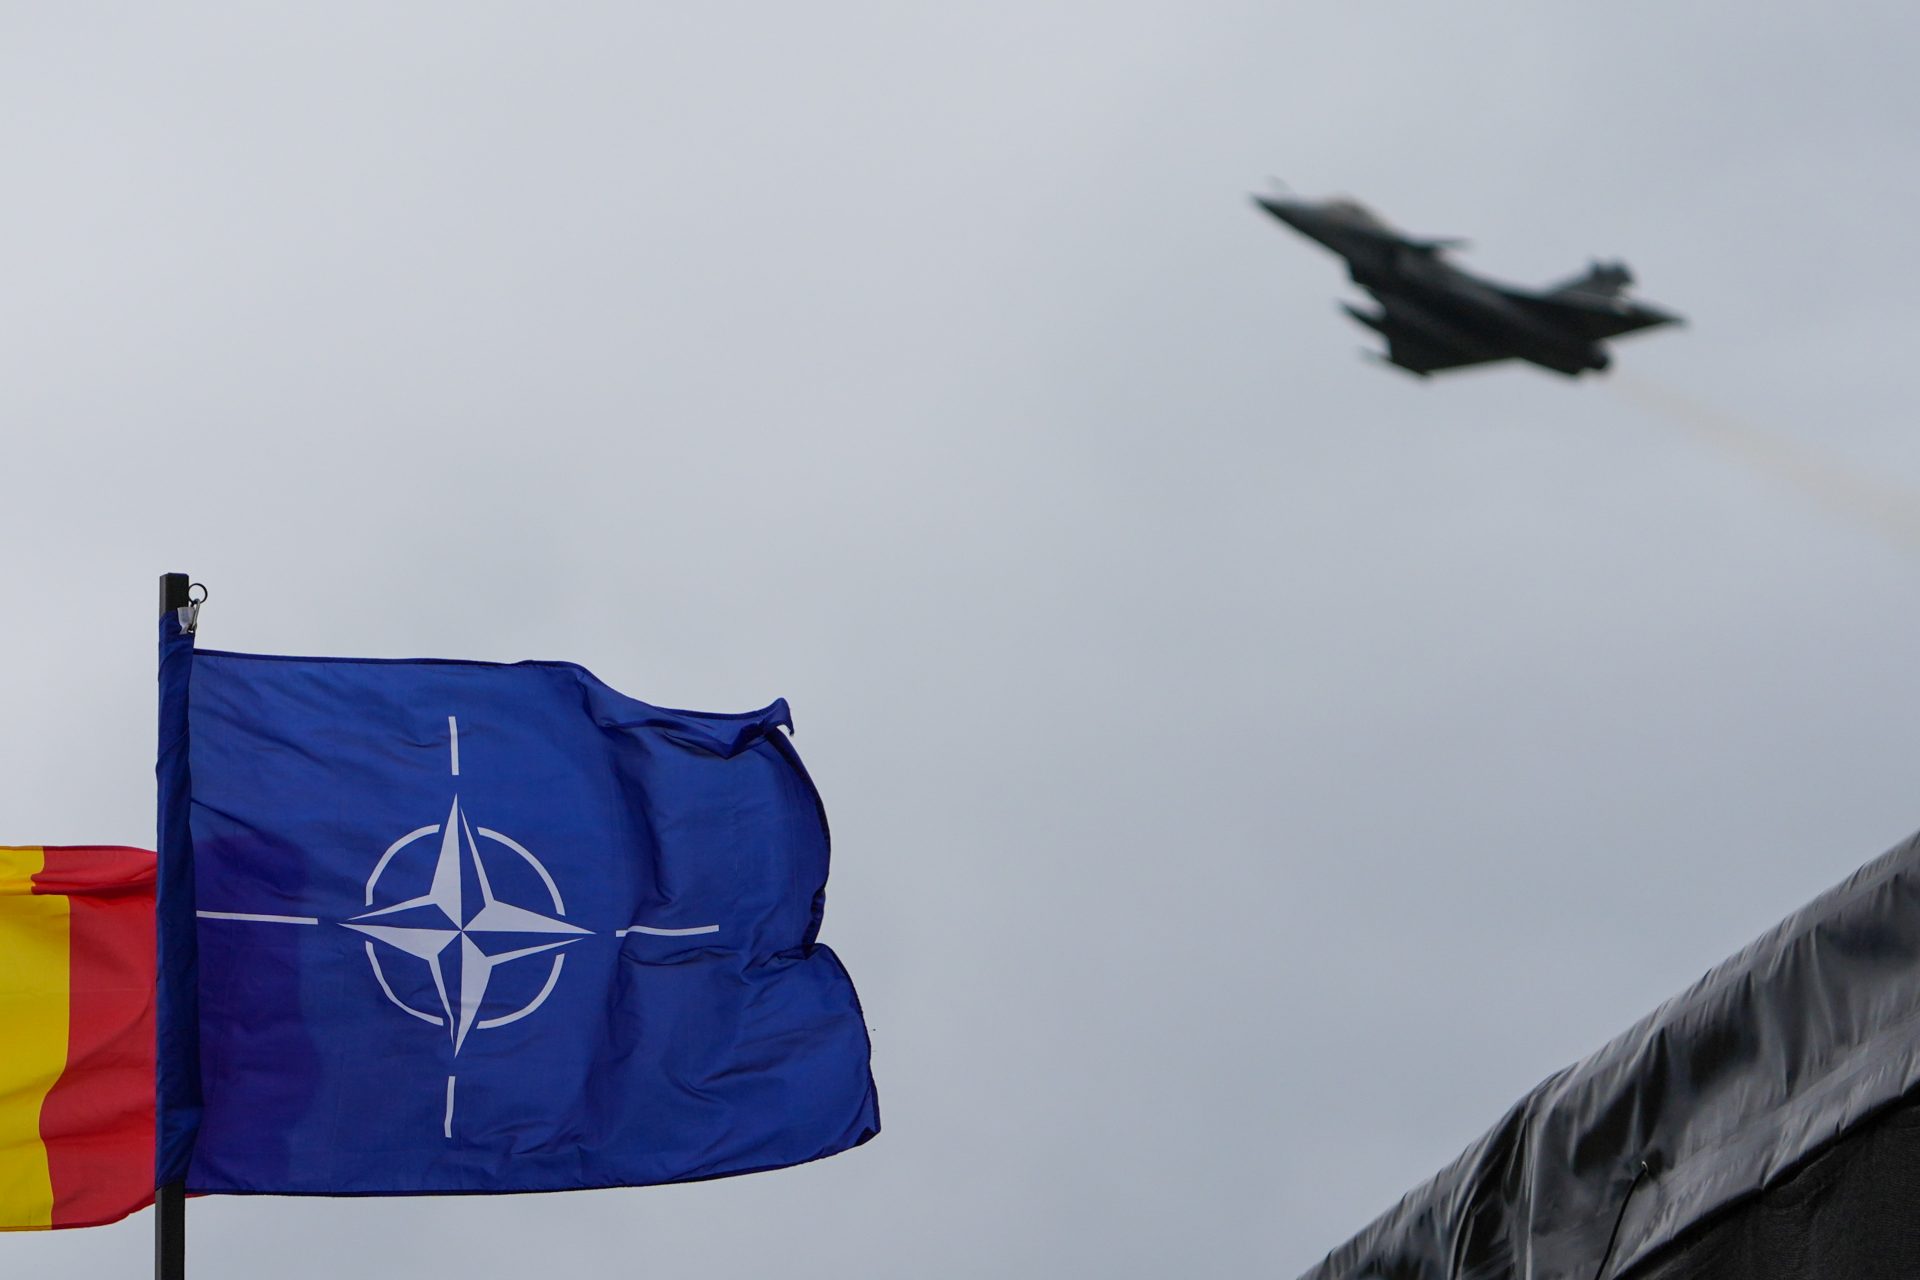 NATO states are discussing more nuclear weapon deployments amid rising tensions